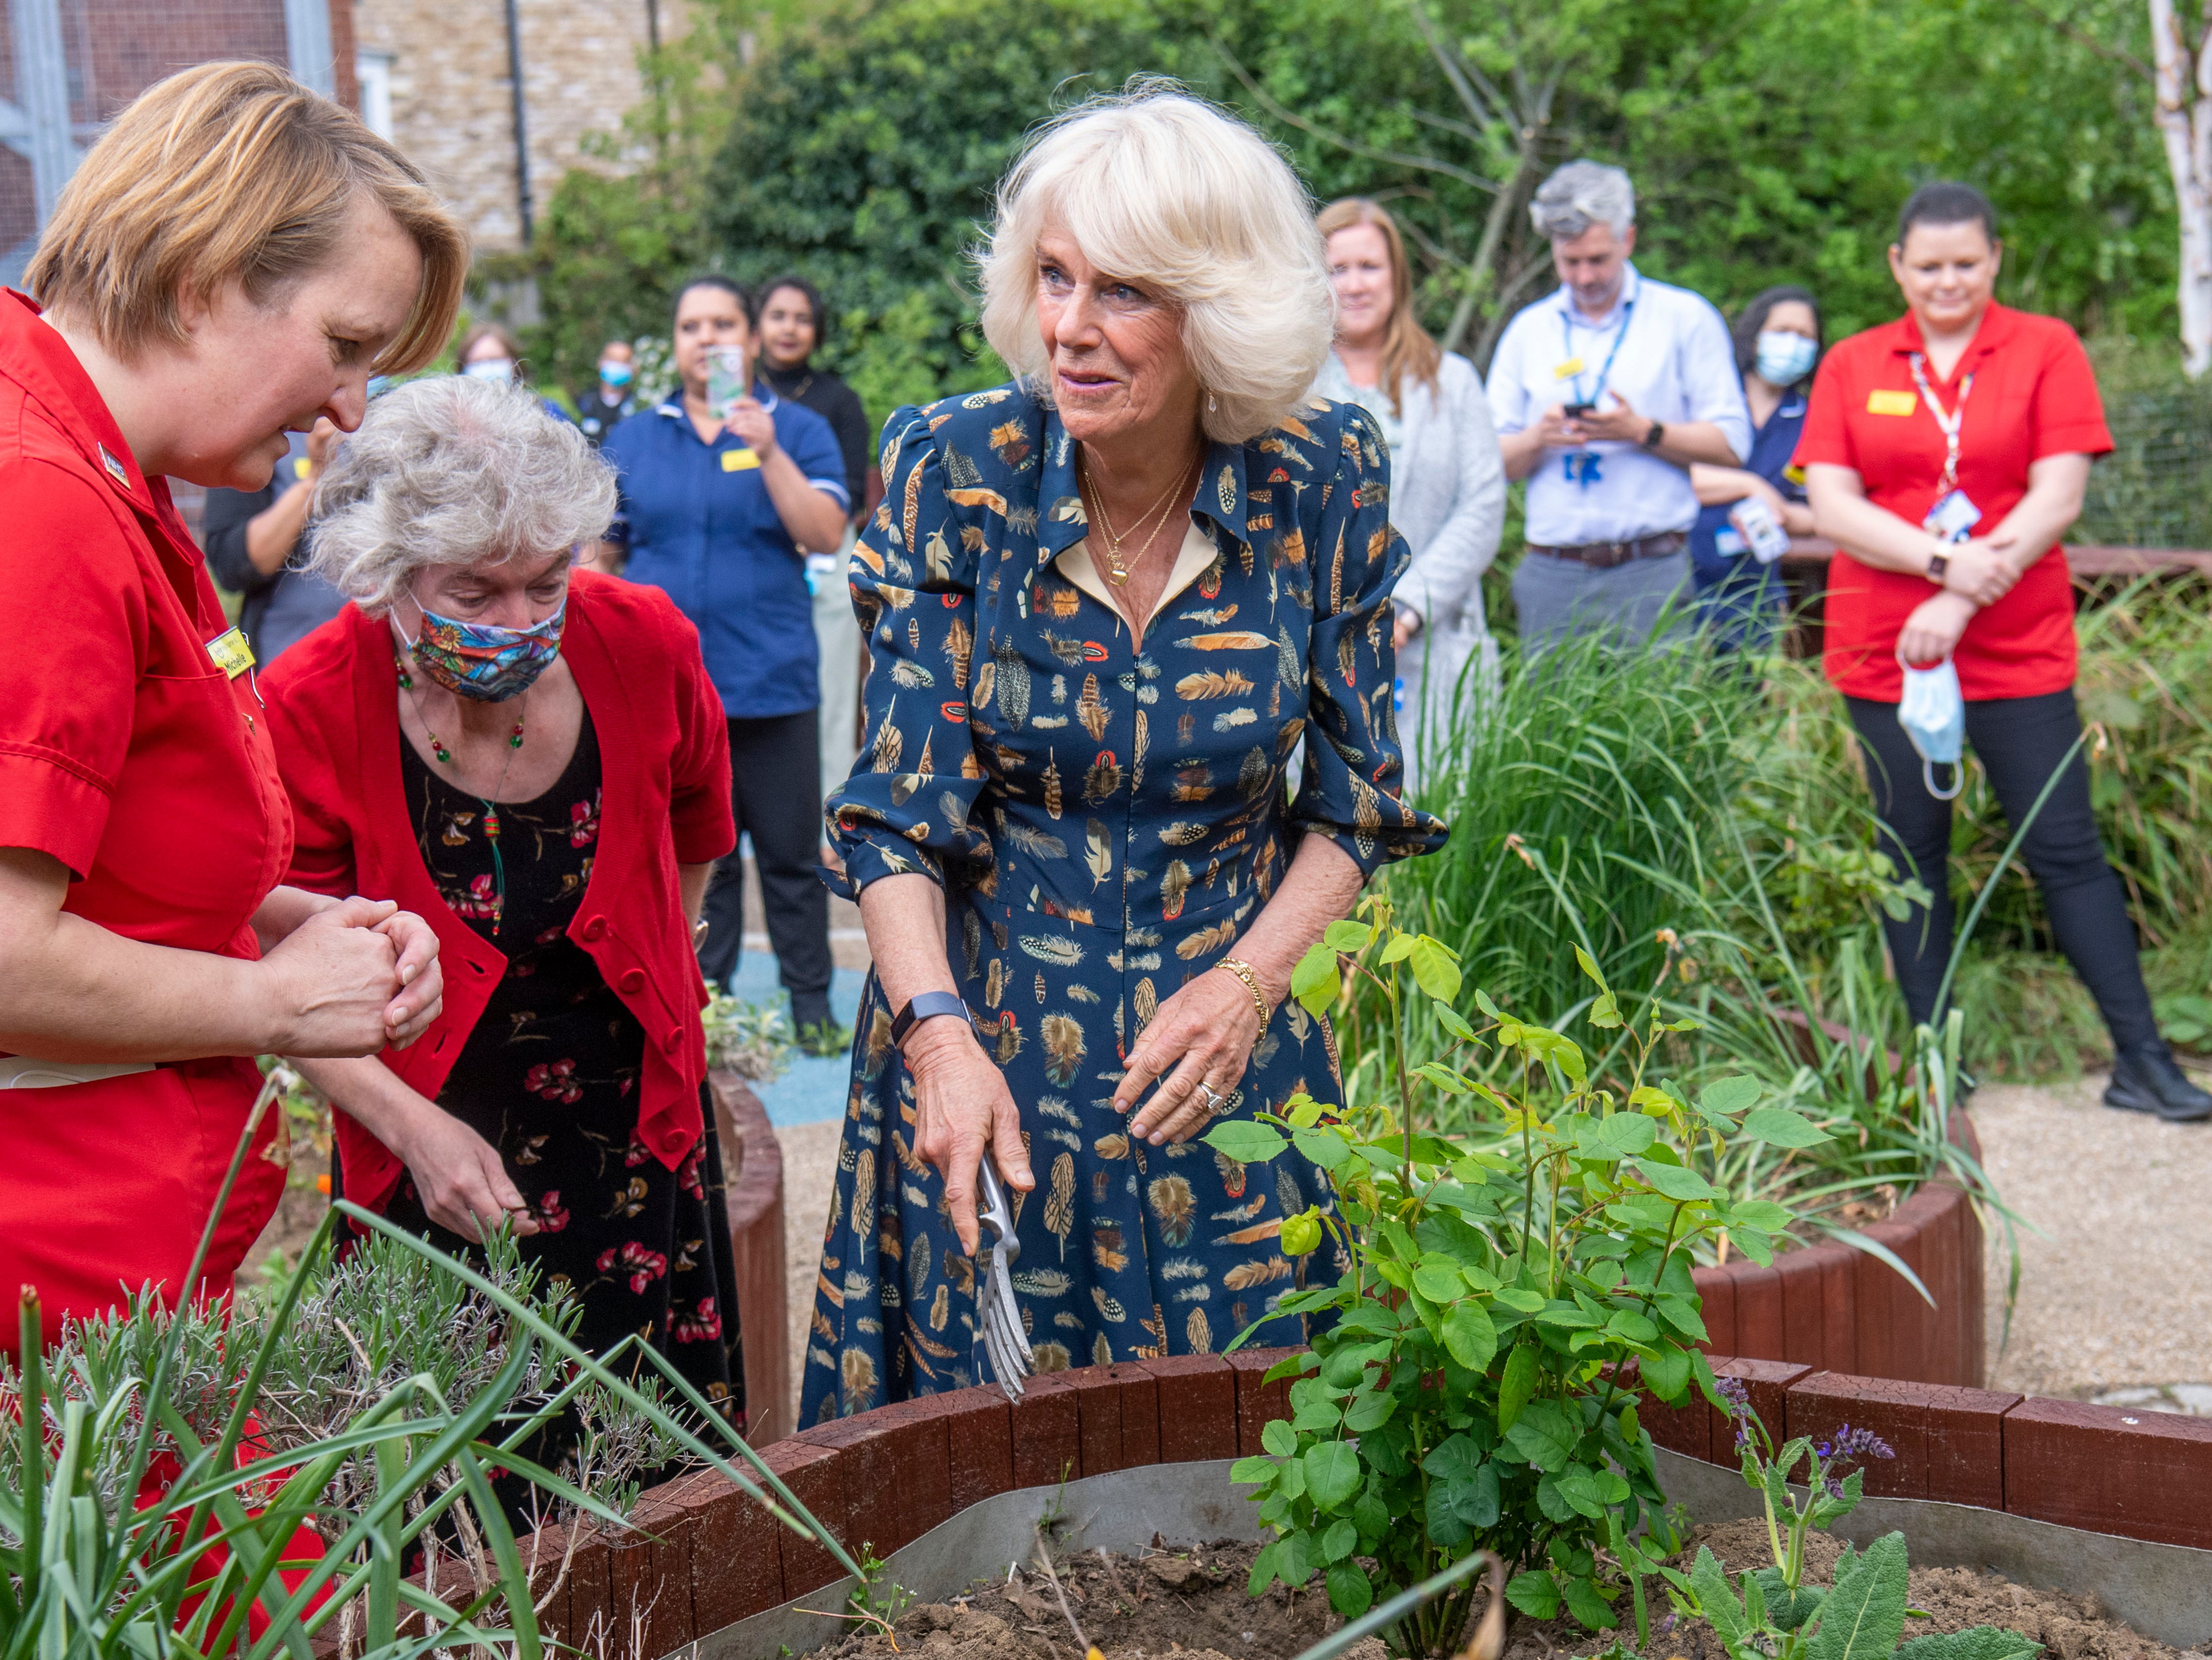 Camilla, then-Duchess of Cornwall, planting new Nye Bevan and Roald Dahl roses alongside Trust staff when she visited the hospital garden at The Whittington Hospital on 12 May 2021